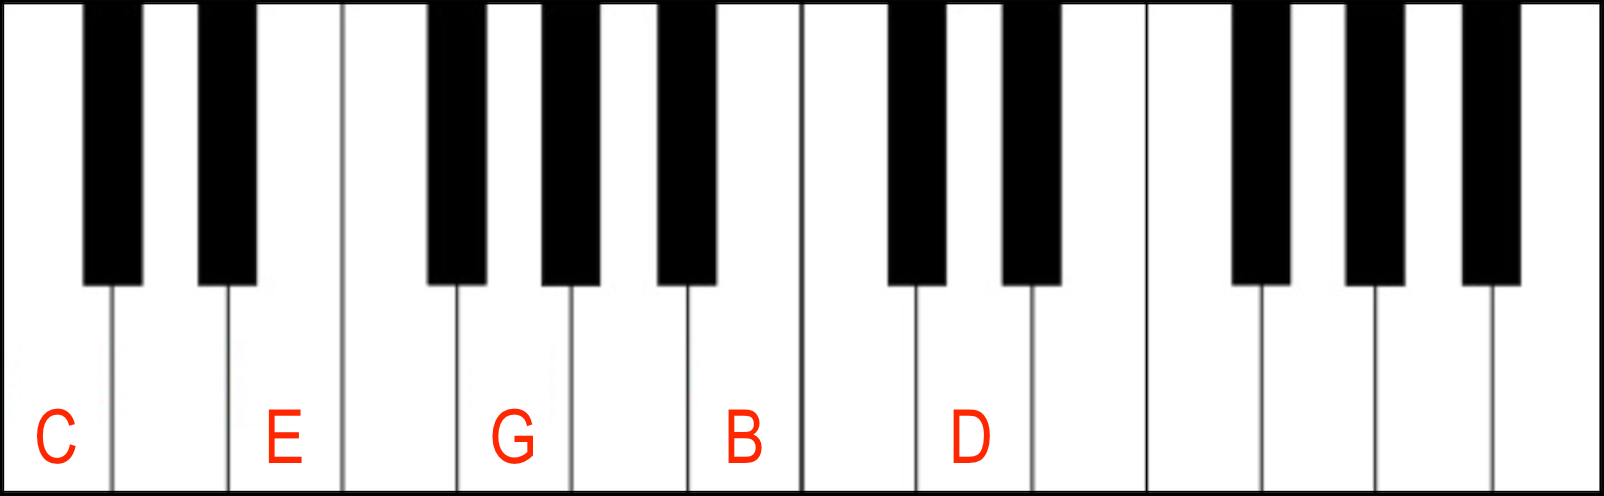 Jazz Piano Chords: Major 9th Jazz Piano Chord in root position